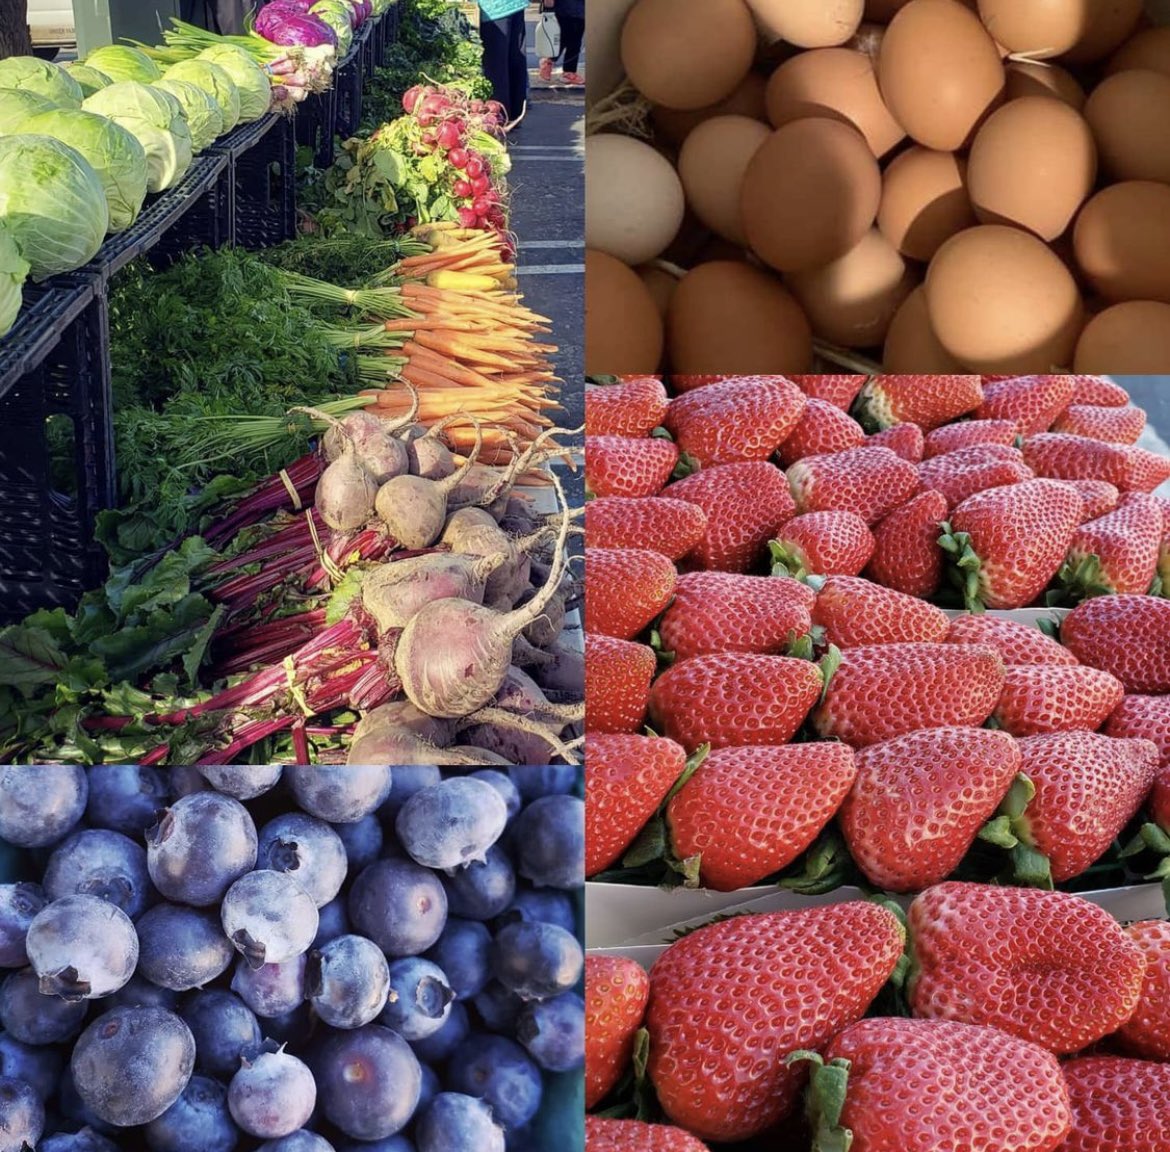 Healthy SBCSS team bringing nutrition education to Helendale’s Certified Farmers Market! Did you know you can get up to $10 in free fruits and vegetables when you use your #CalFreshEBT benefits? #MarketMatch #SupportLocalFarmers